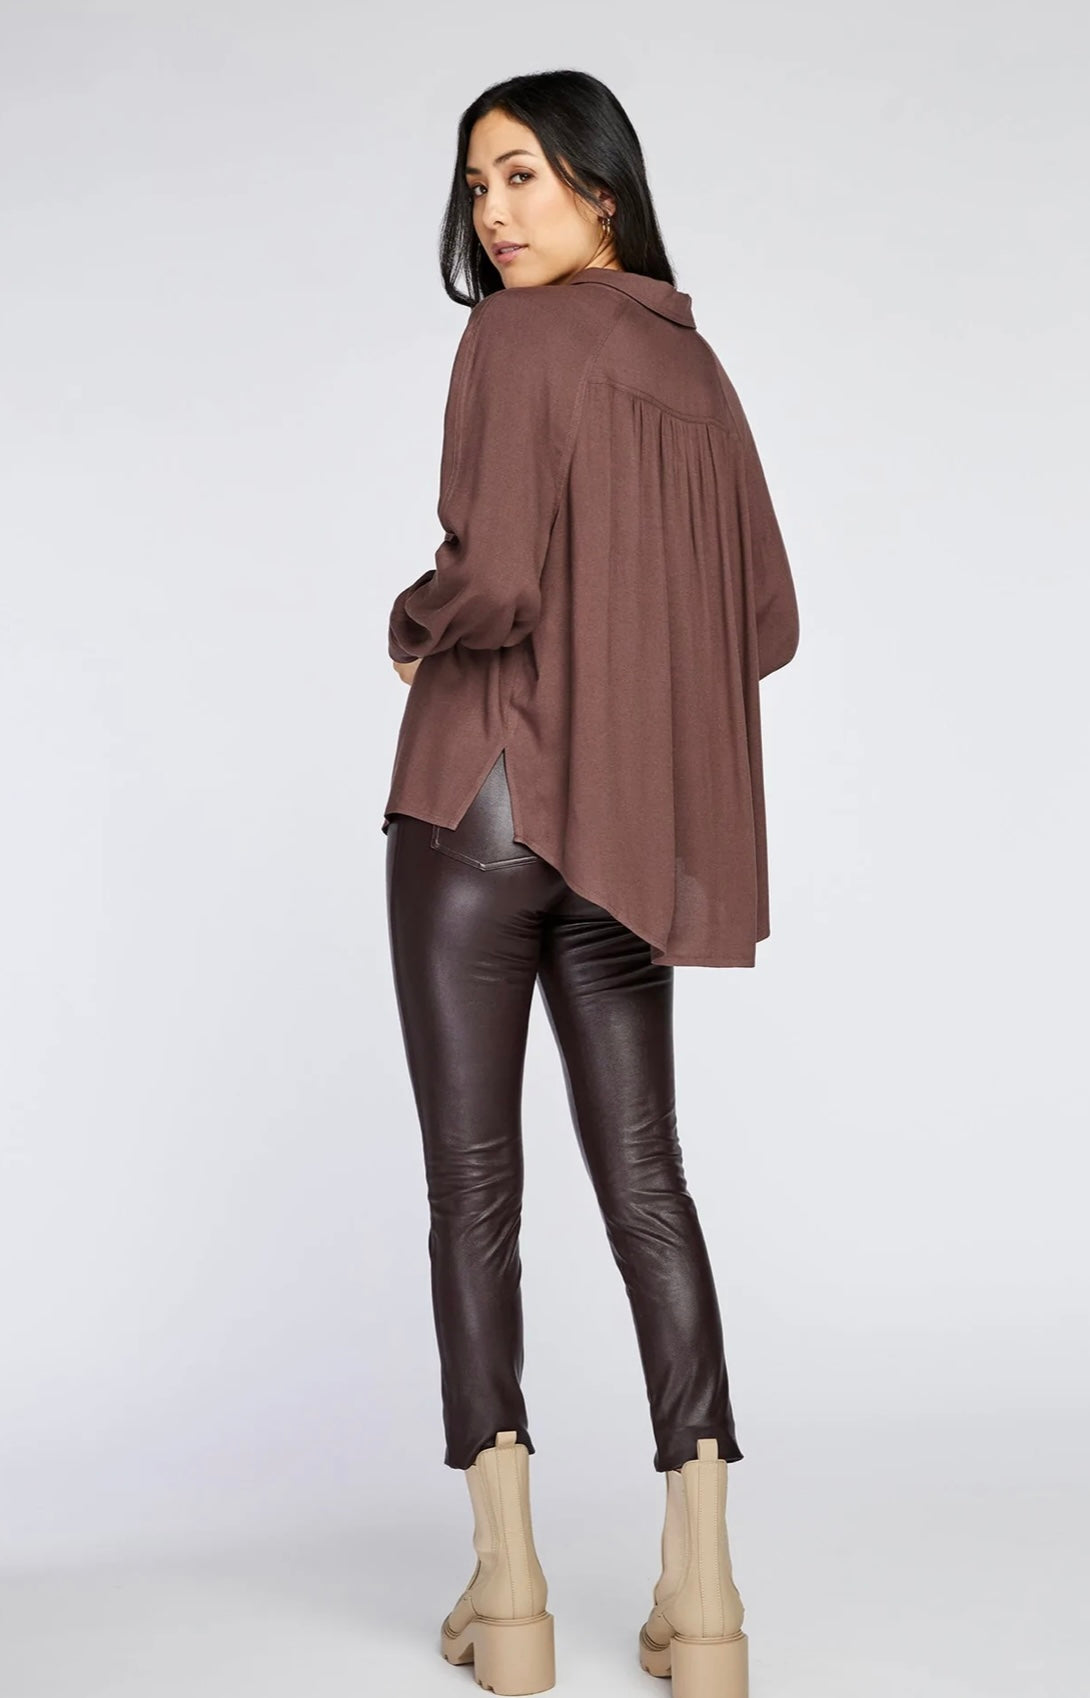 The Fiona Blouse - Heather Amaretto Brown - Gentle Fawn